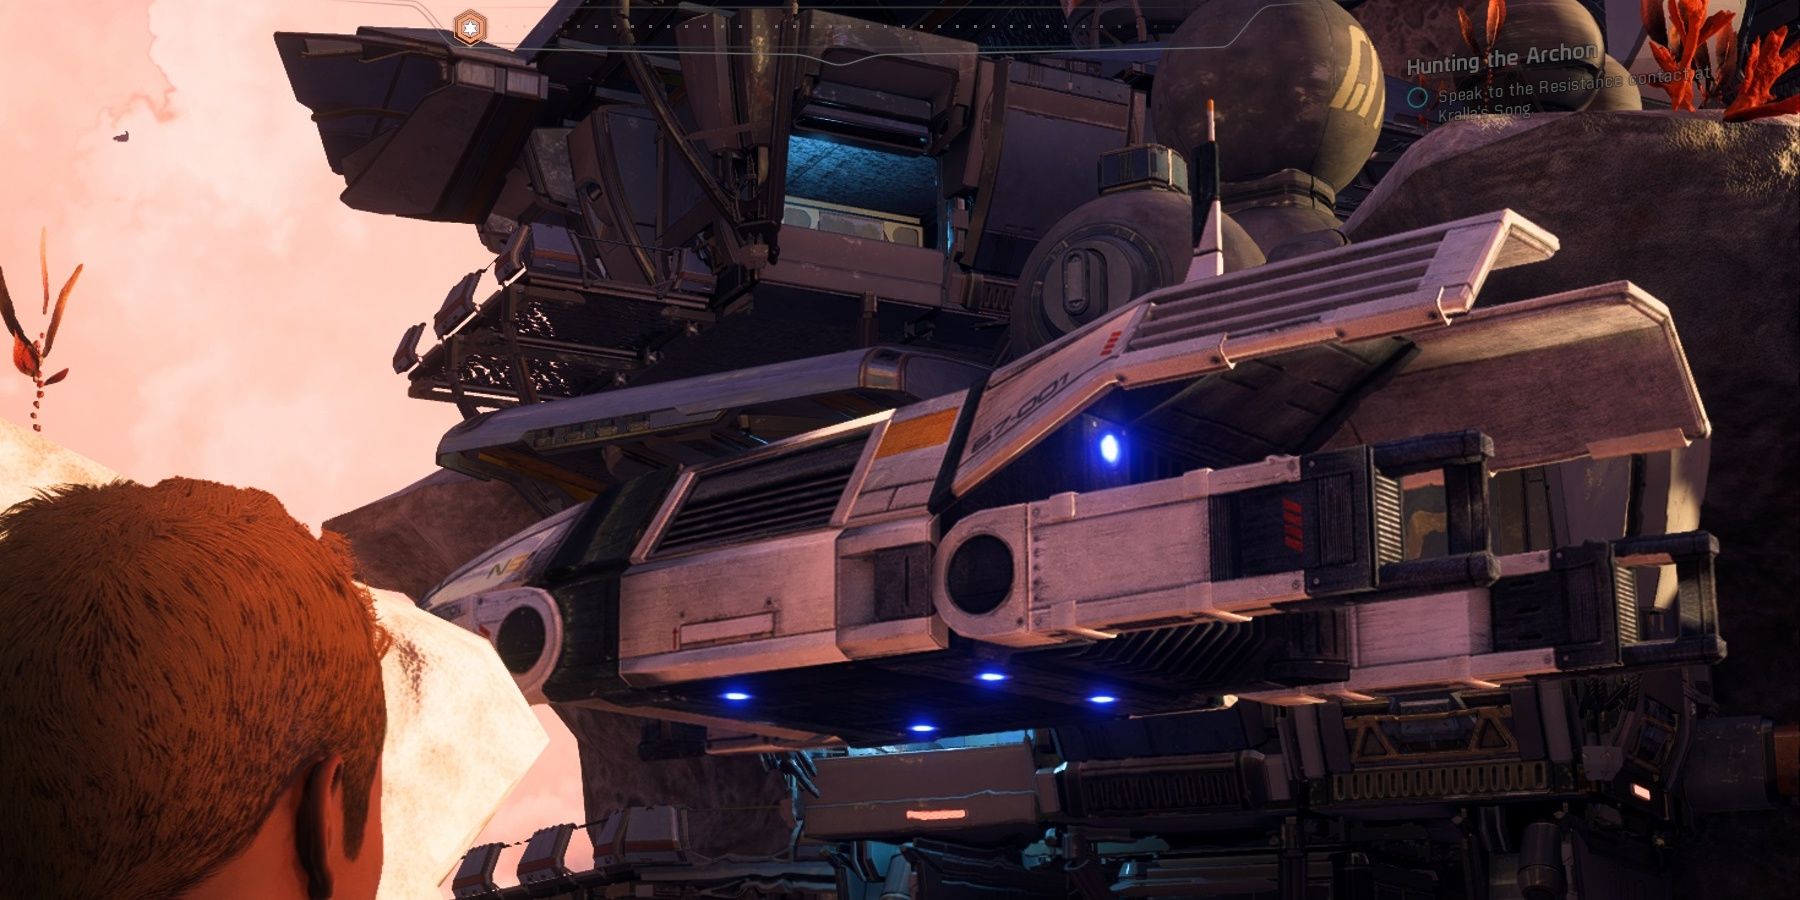 Cerberus Shuttle Takes Off In Kadara Port And References The Organization From The Original Trilogy